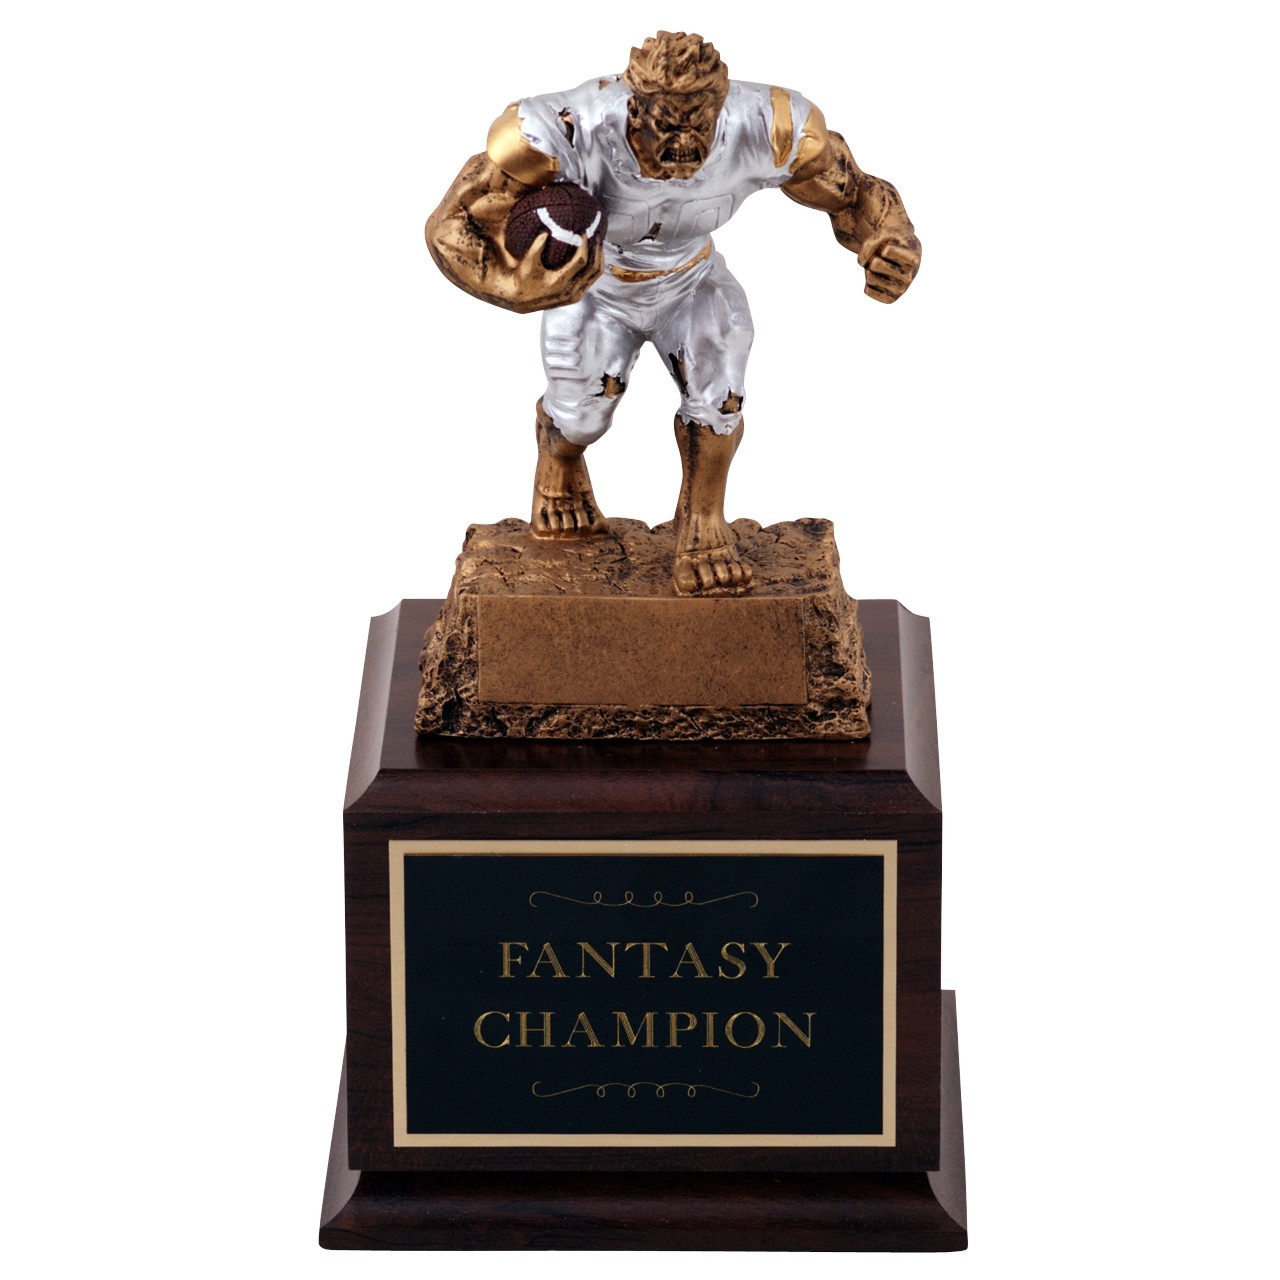 Free Engraving Assembly Required Fantasy Football Trophy 